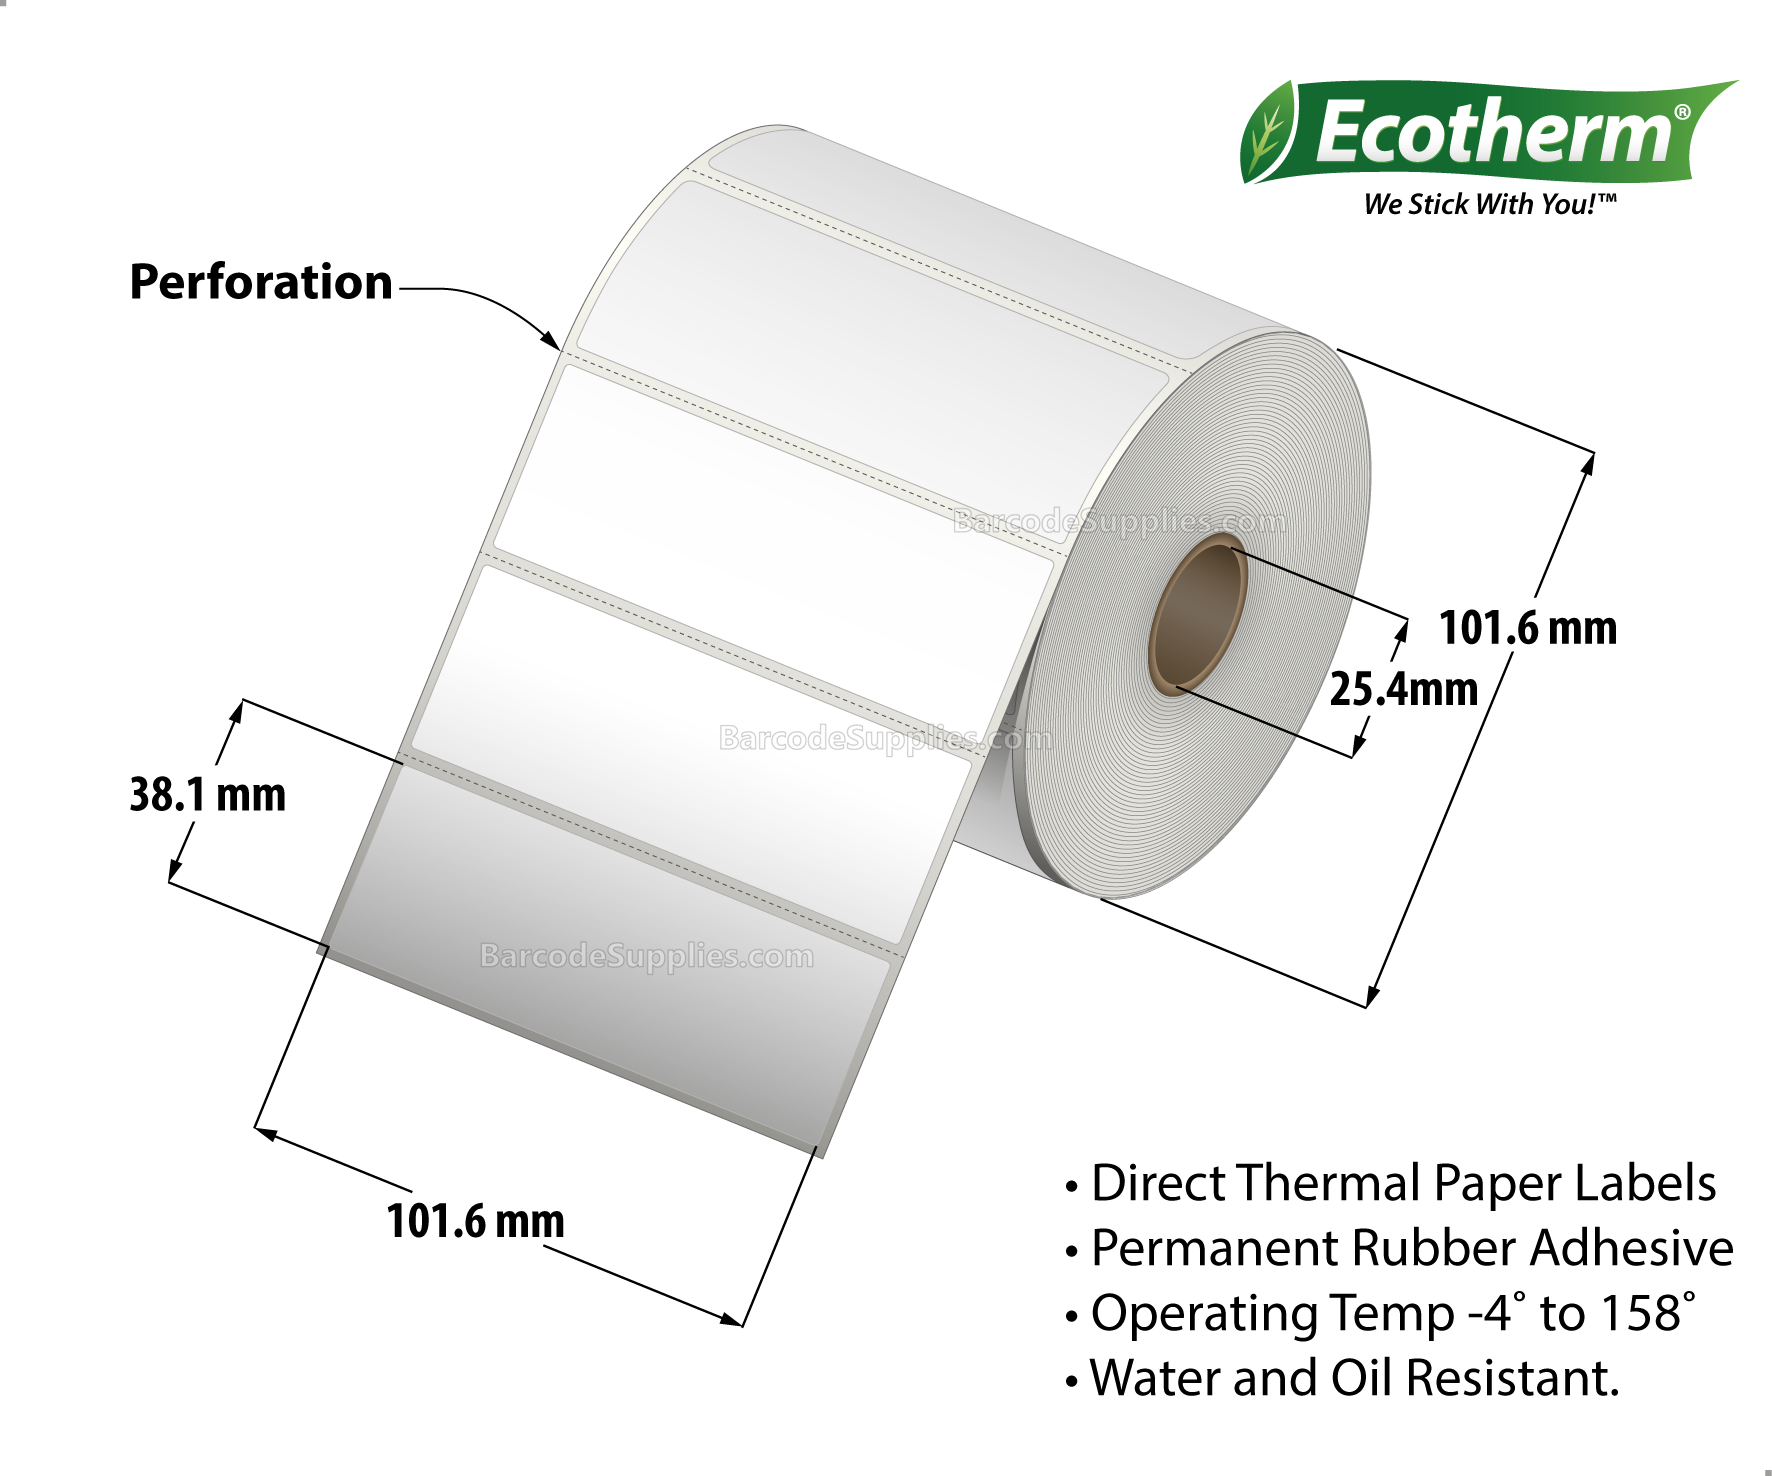 4 x 1.5 Direct Thermal White Labels With Rubber Adhesive - Perforated - 985 Labels Per Roll - Carton Of 4 Rolls - 3940 Labels Total - MPN: ECOTHERM14126-4